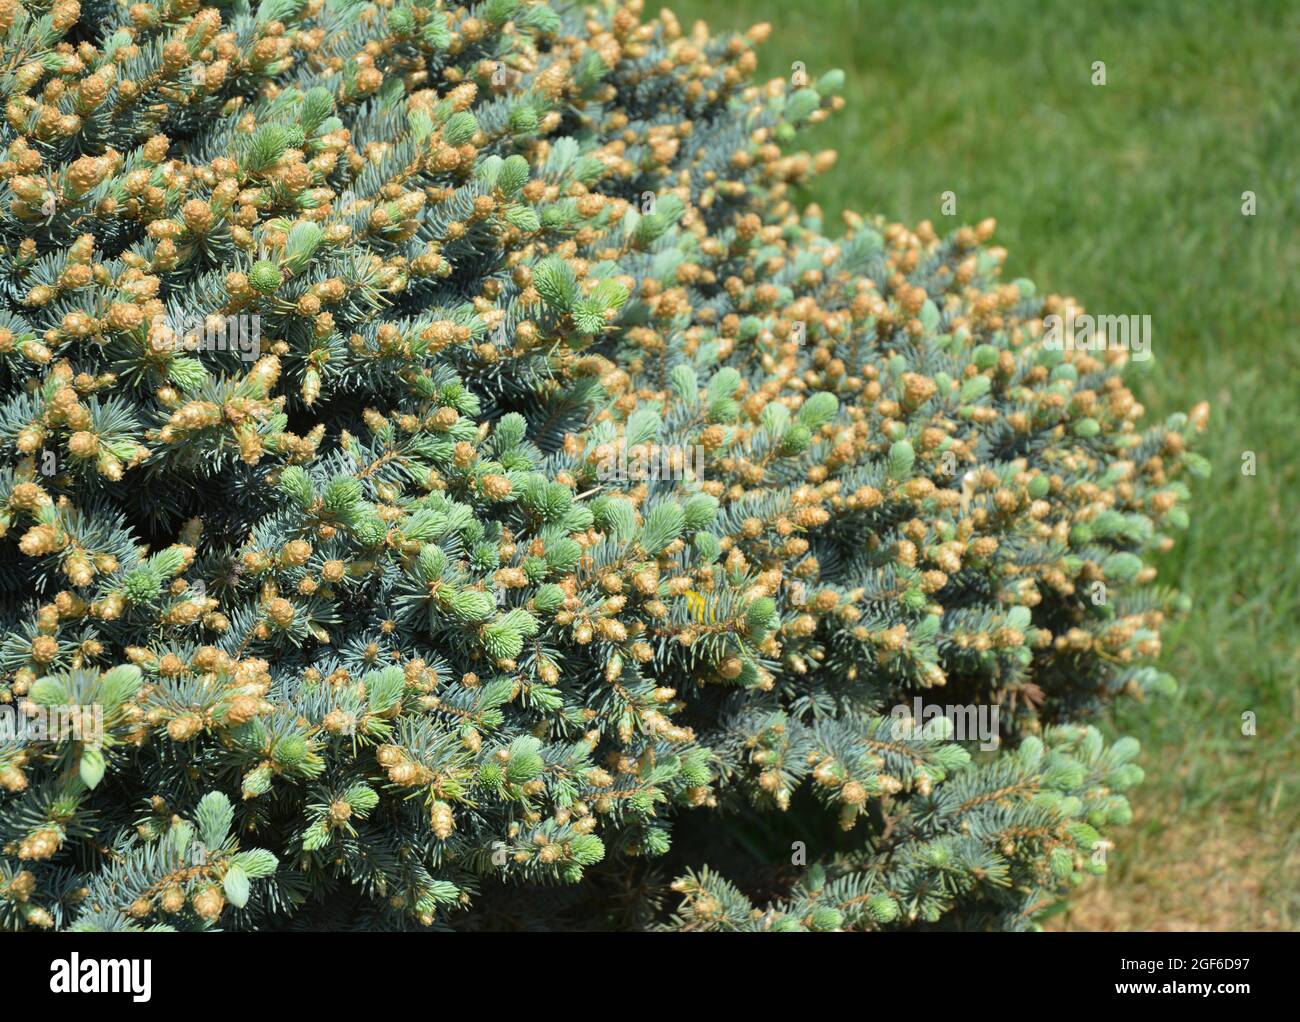 A close-up on a dwarf blue spruce, picea pungens nana, picea pungens globosa foliage in spring. Stock Photo